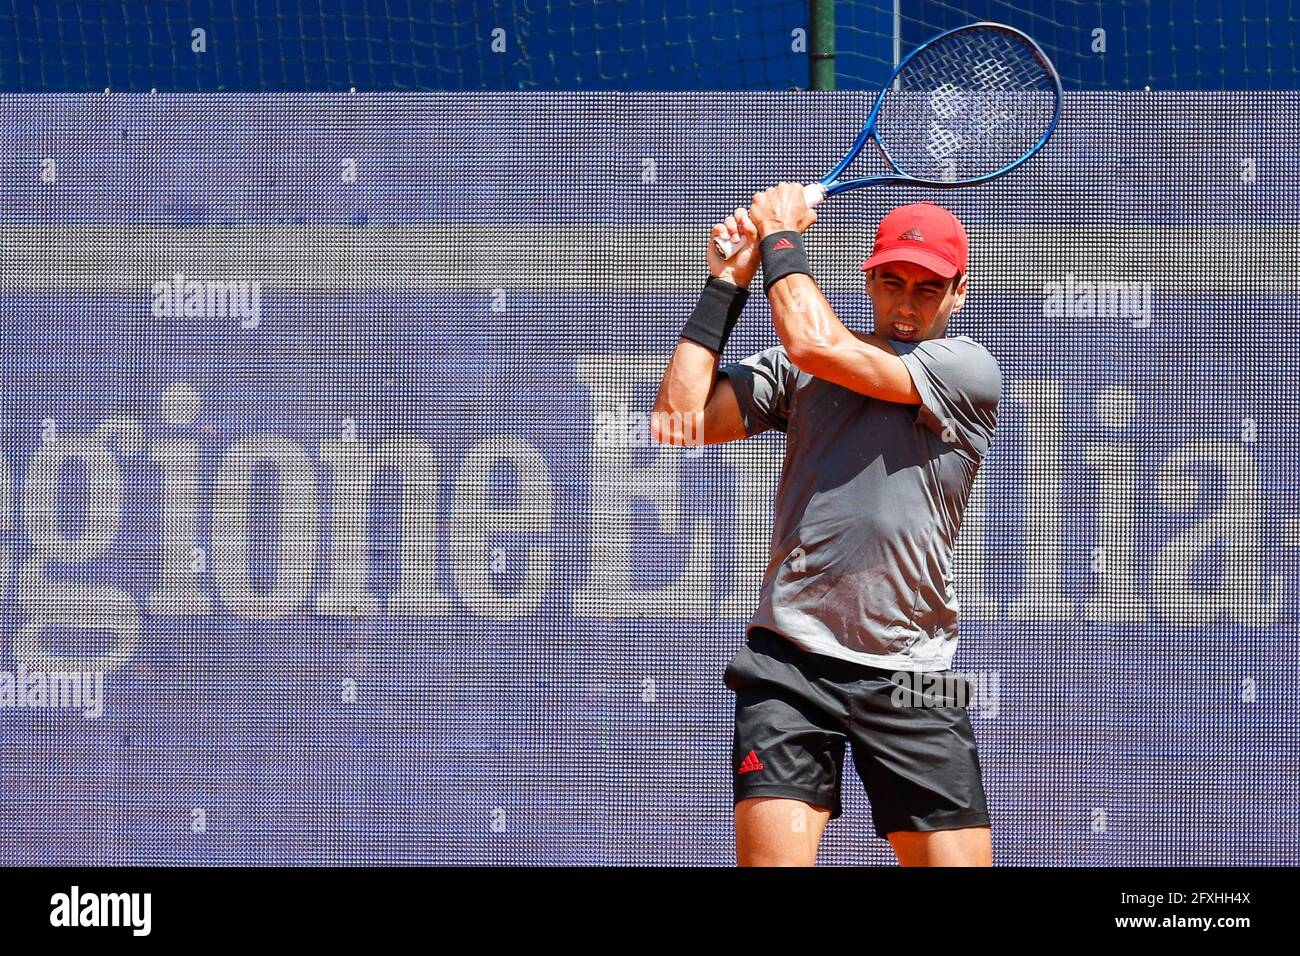 Parma, Italy. 27th May, 2021. The spanish tennis player Jaume Munar during ATP 250 Emilia-Romagna Open Mutti Cup during ATP 250 Emilia Romagna Open 2021, Tennis Internationals in Parma, Italy, May 27 2021 Credit: Independent Photo Agency/Alamy Live News Stock Photo